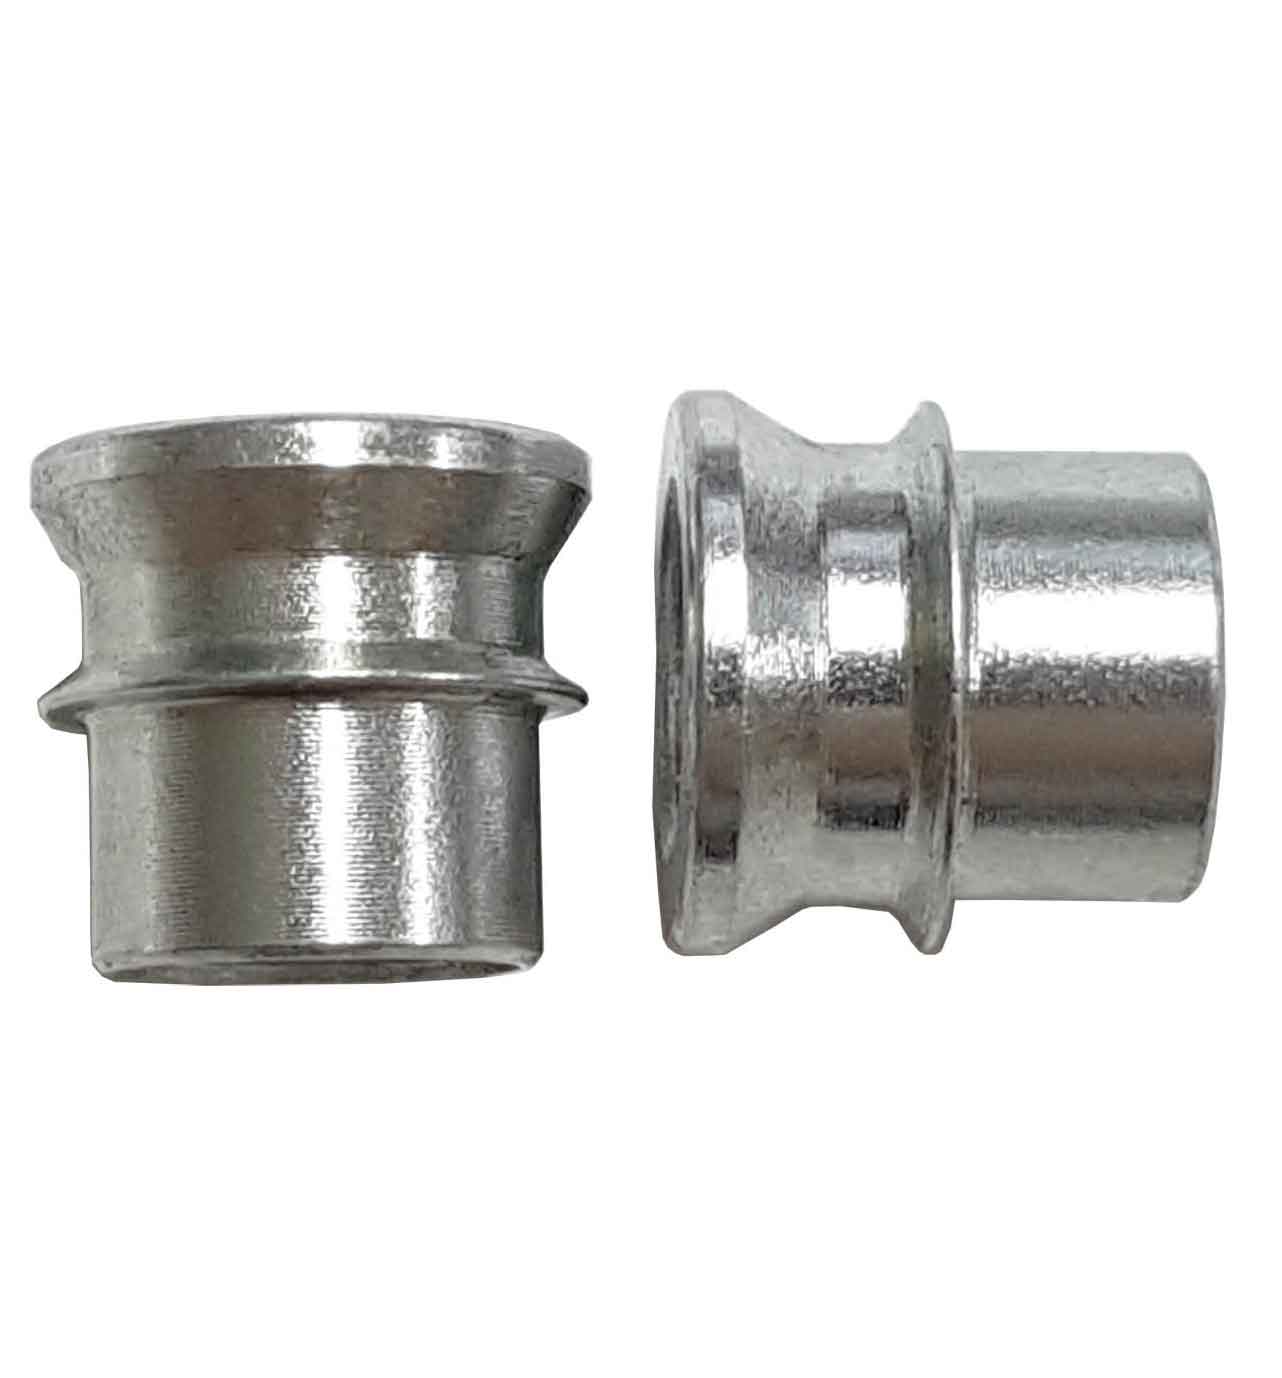 M10 to M8 Rod End Misalignment Reducers